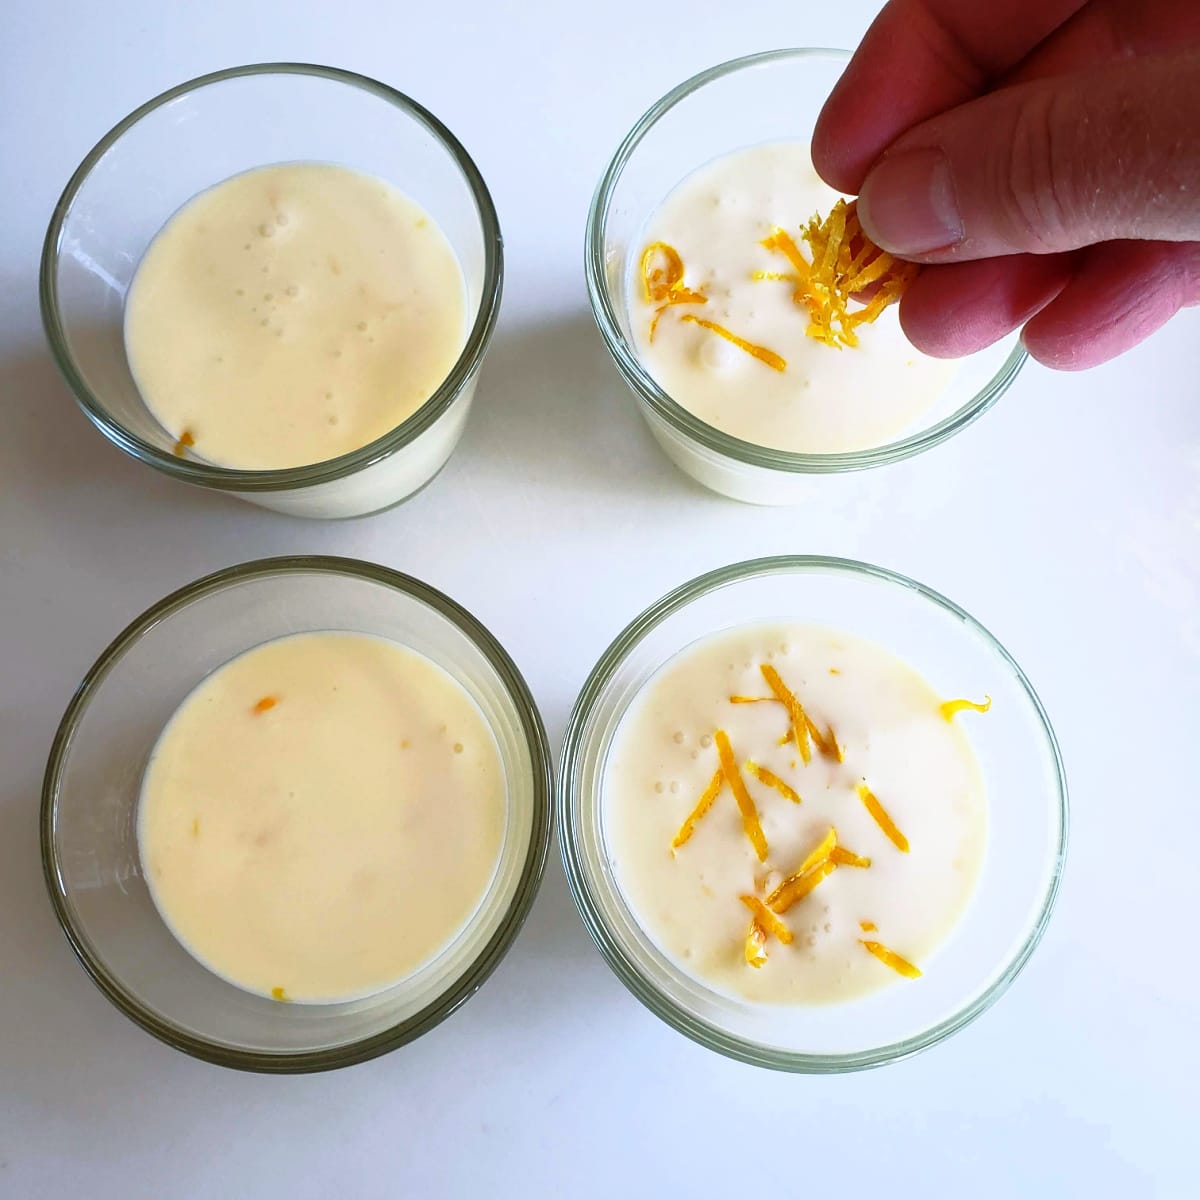 A hand sprinkles lemon zest on top of a glass with Meyer Lemon Posset in it next to 3 other glasses on a white background